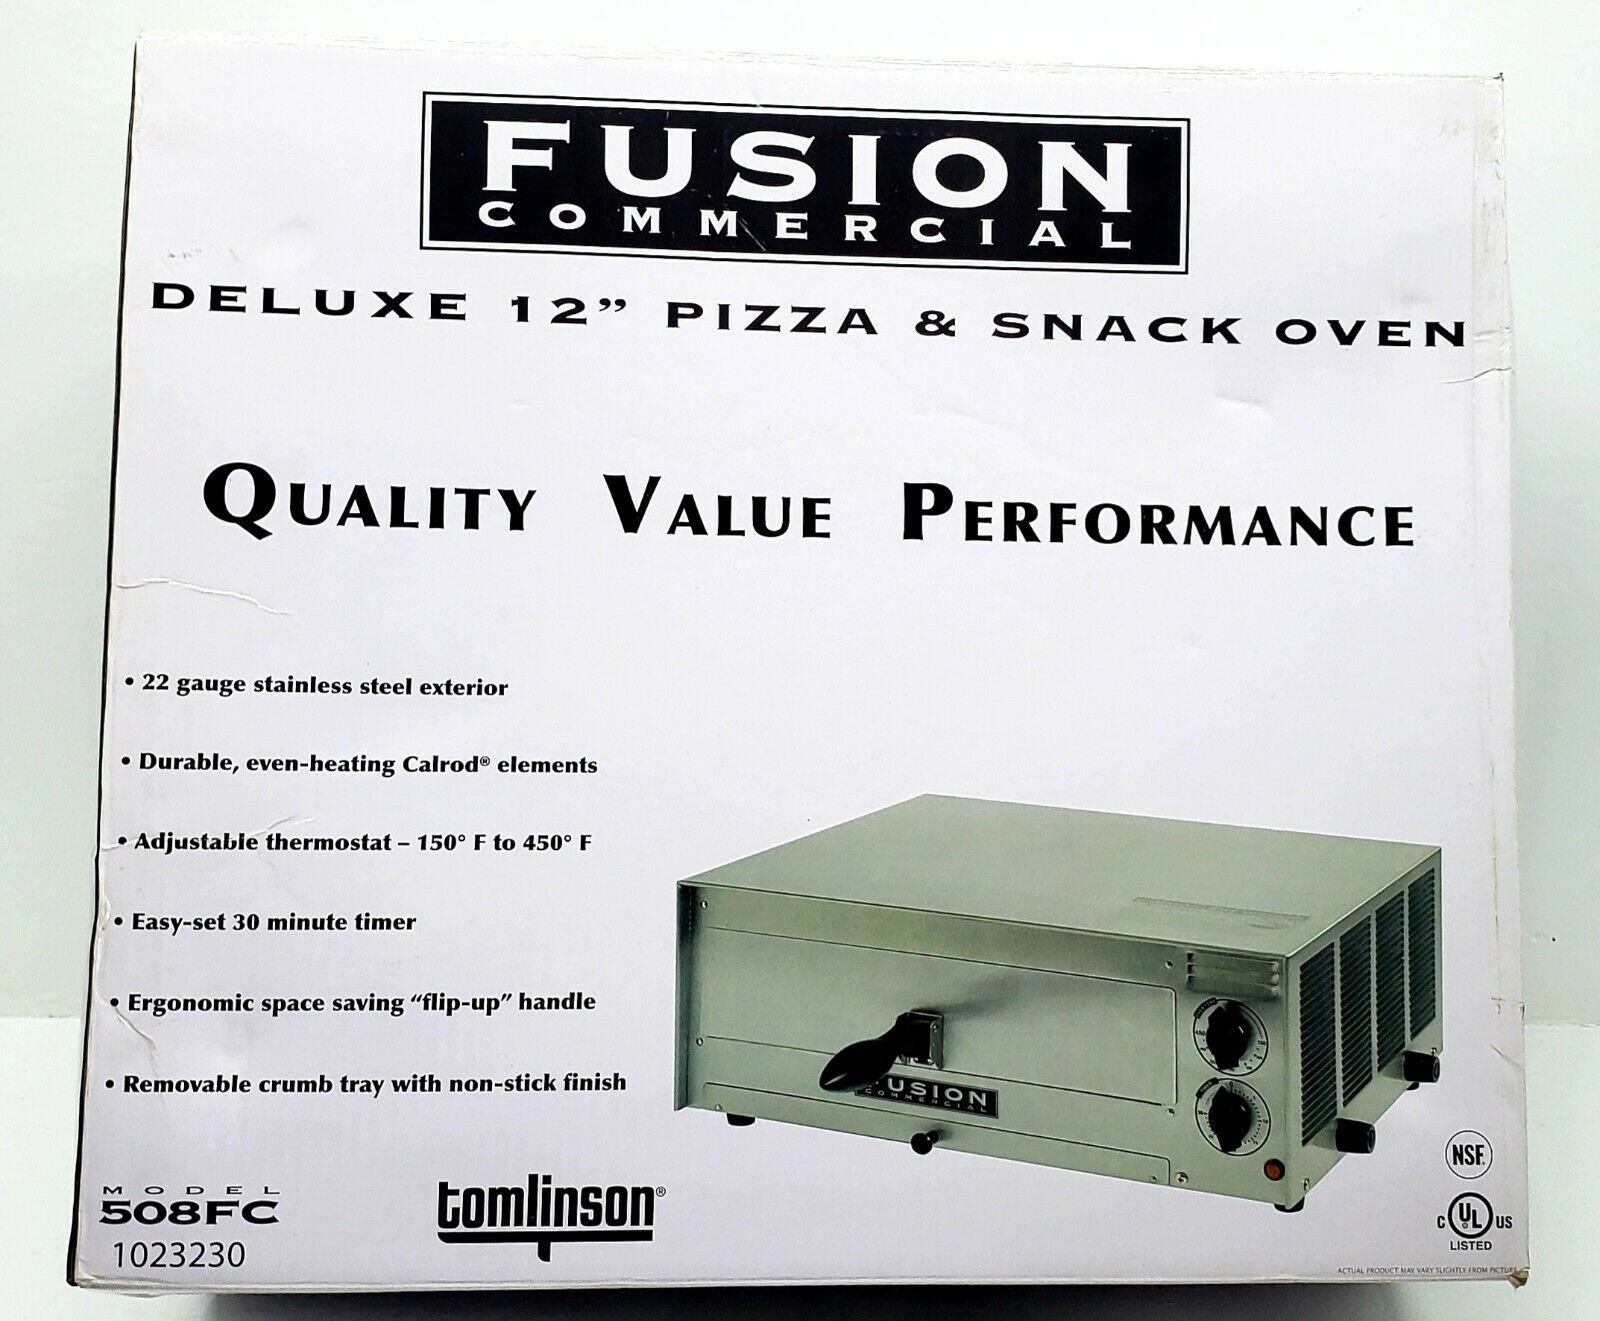 Fusion Commerce Commercial Cooking Appliance 12" Pizza Biaggi Bake Oven 120v